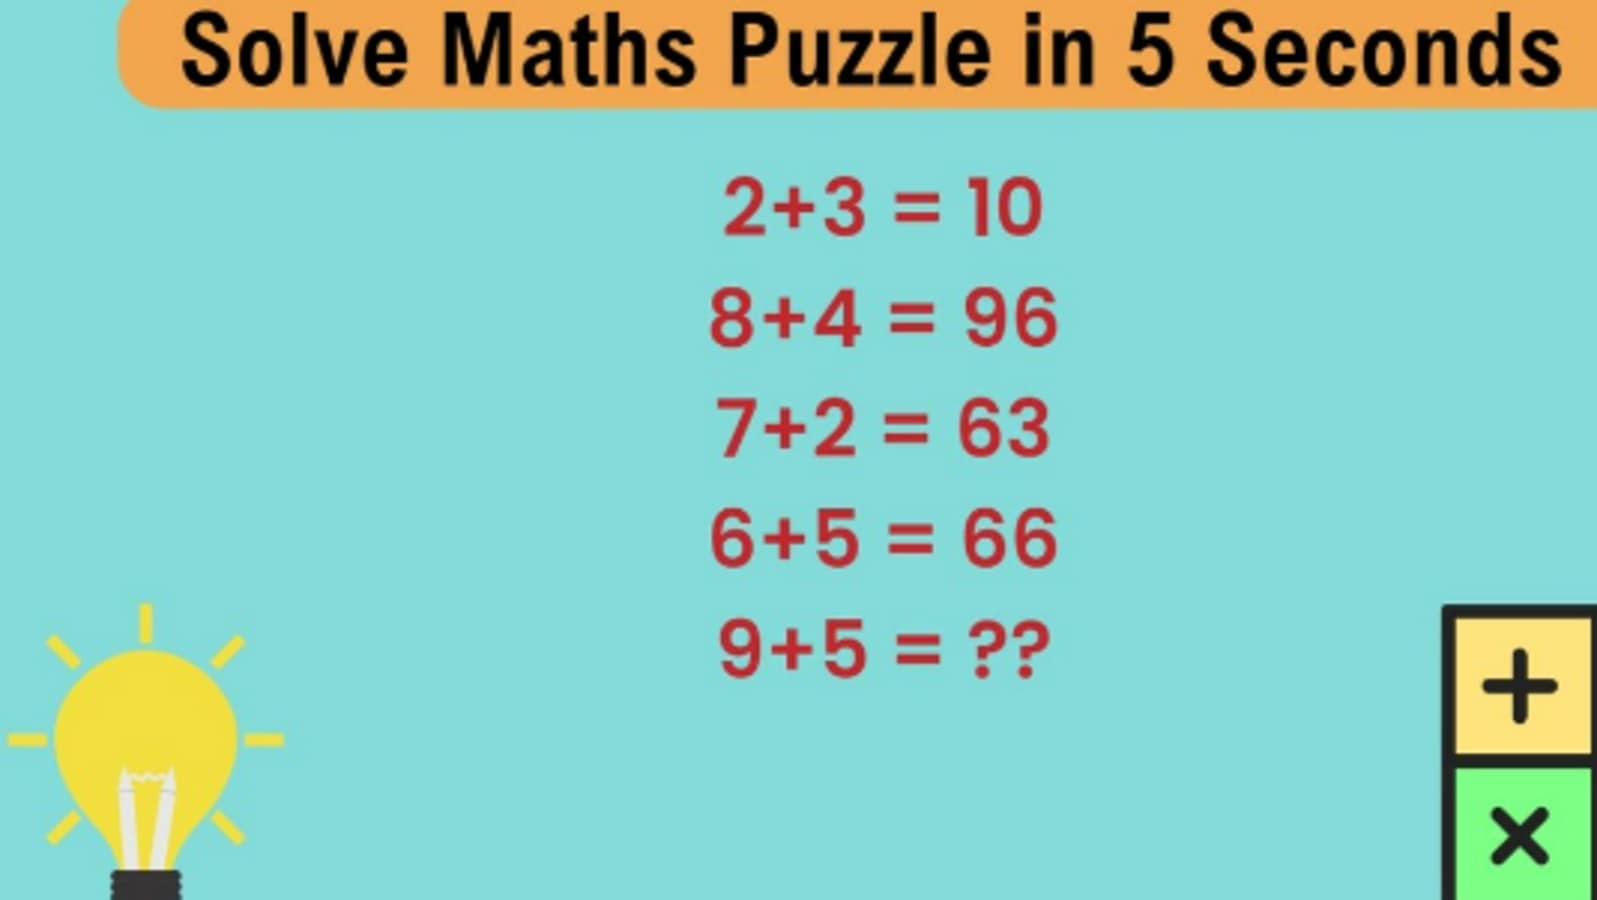 Brain teaser: You have only 5 seconds to solve this simple maths puzzle